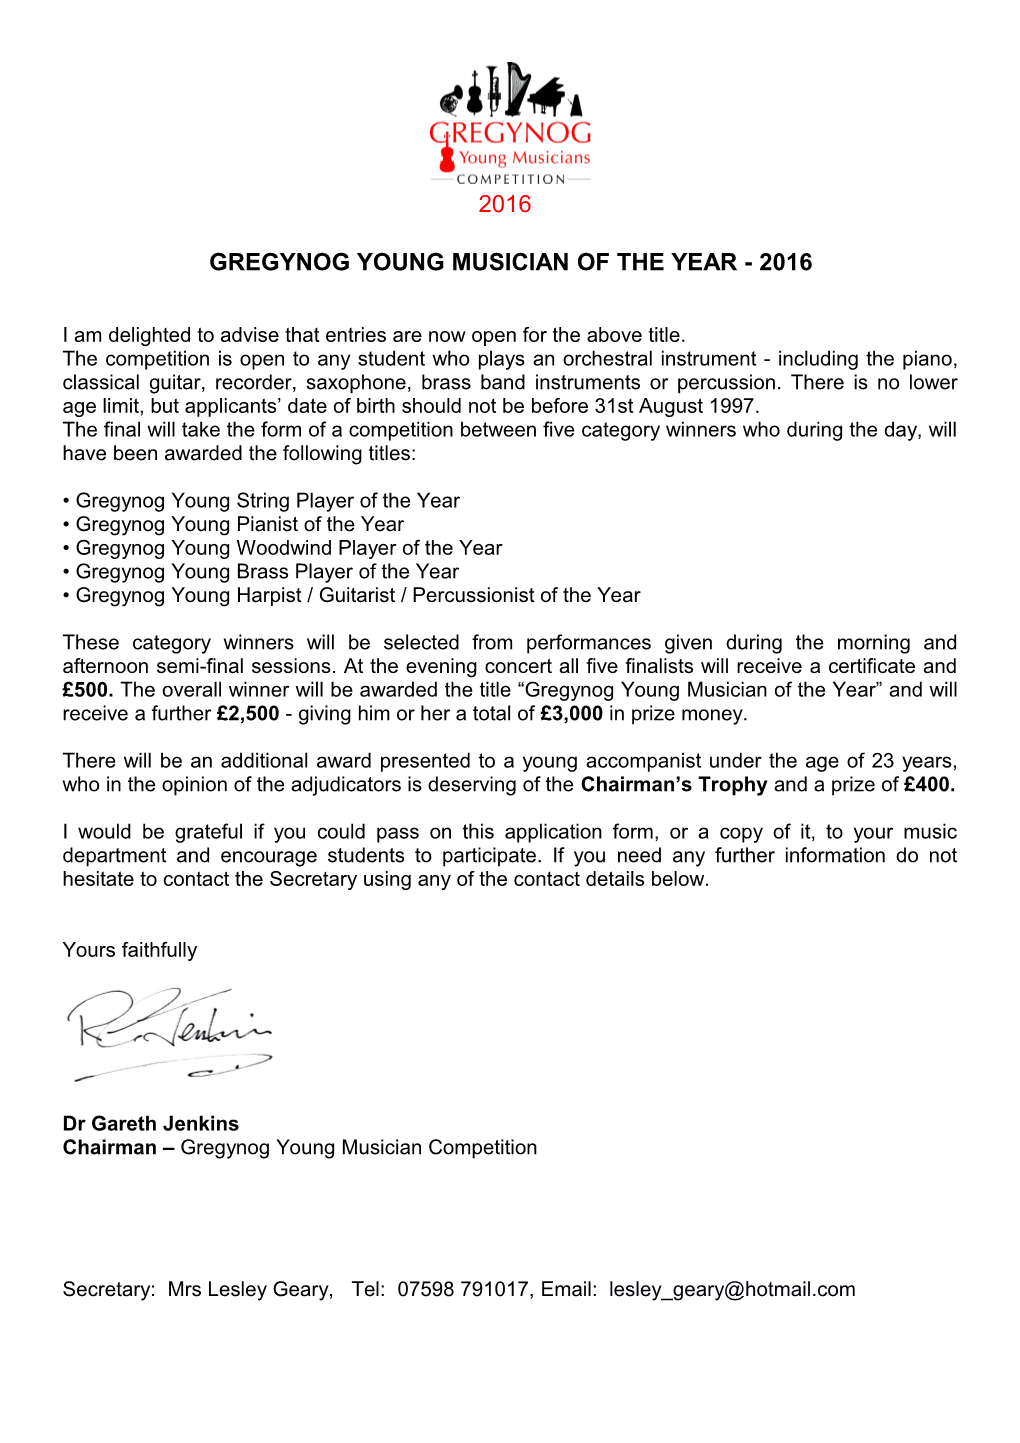 Gregynog Young Musician of the Year - 2016